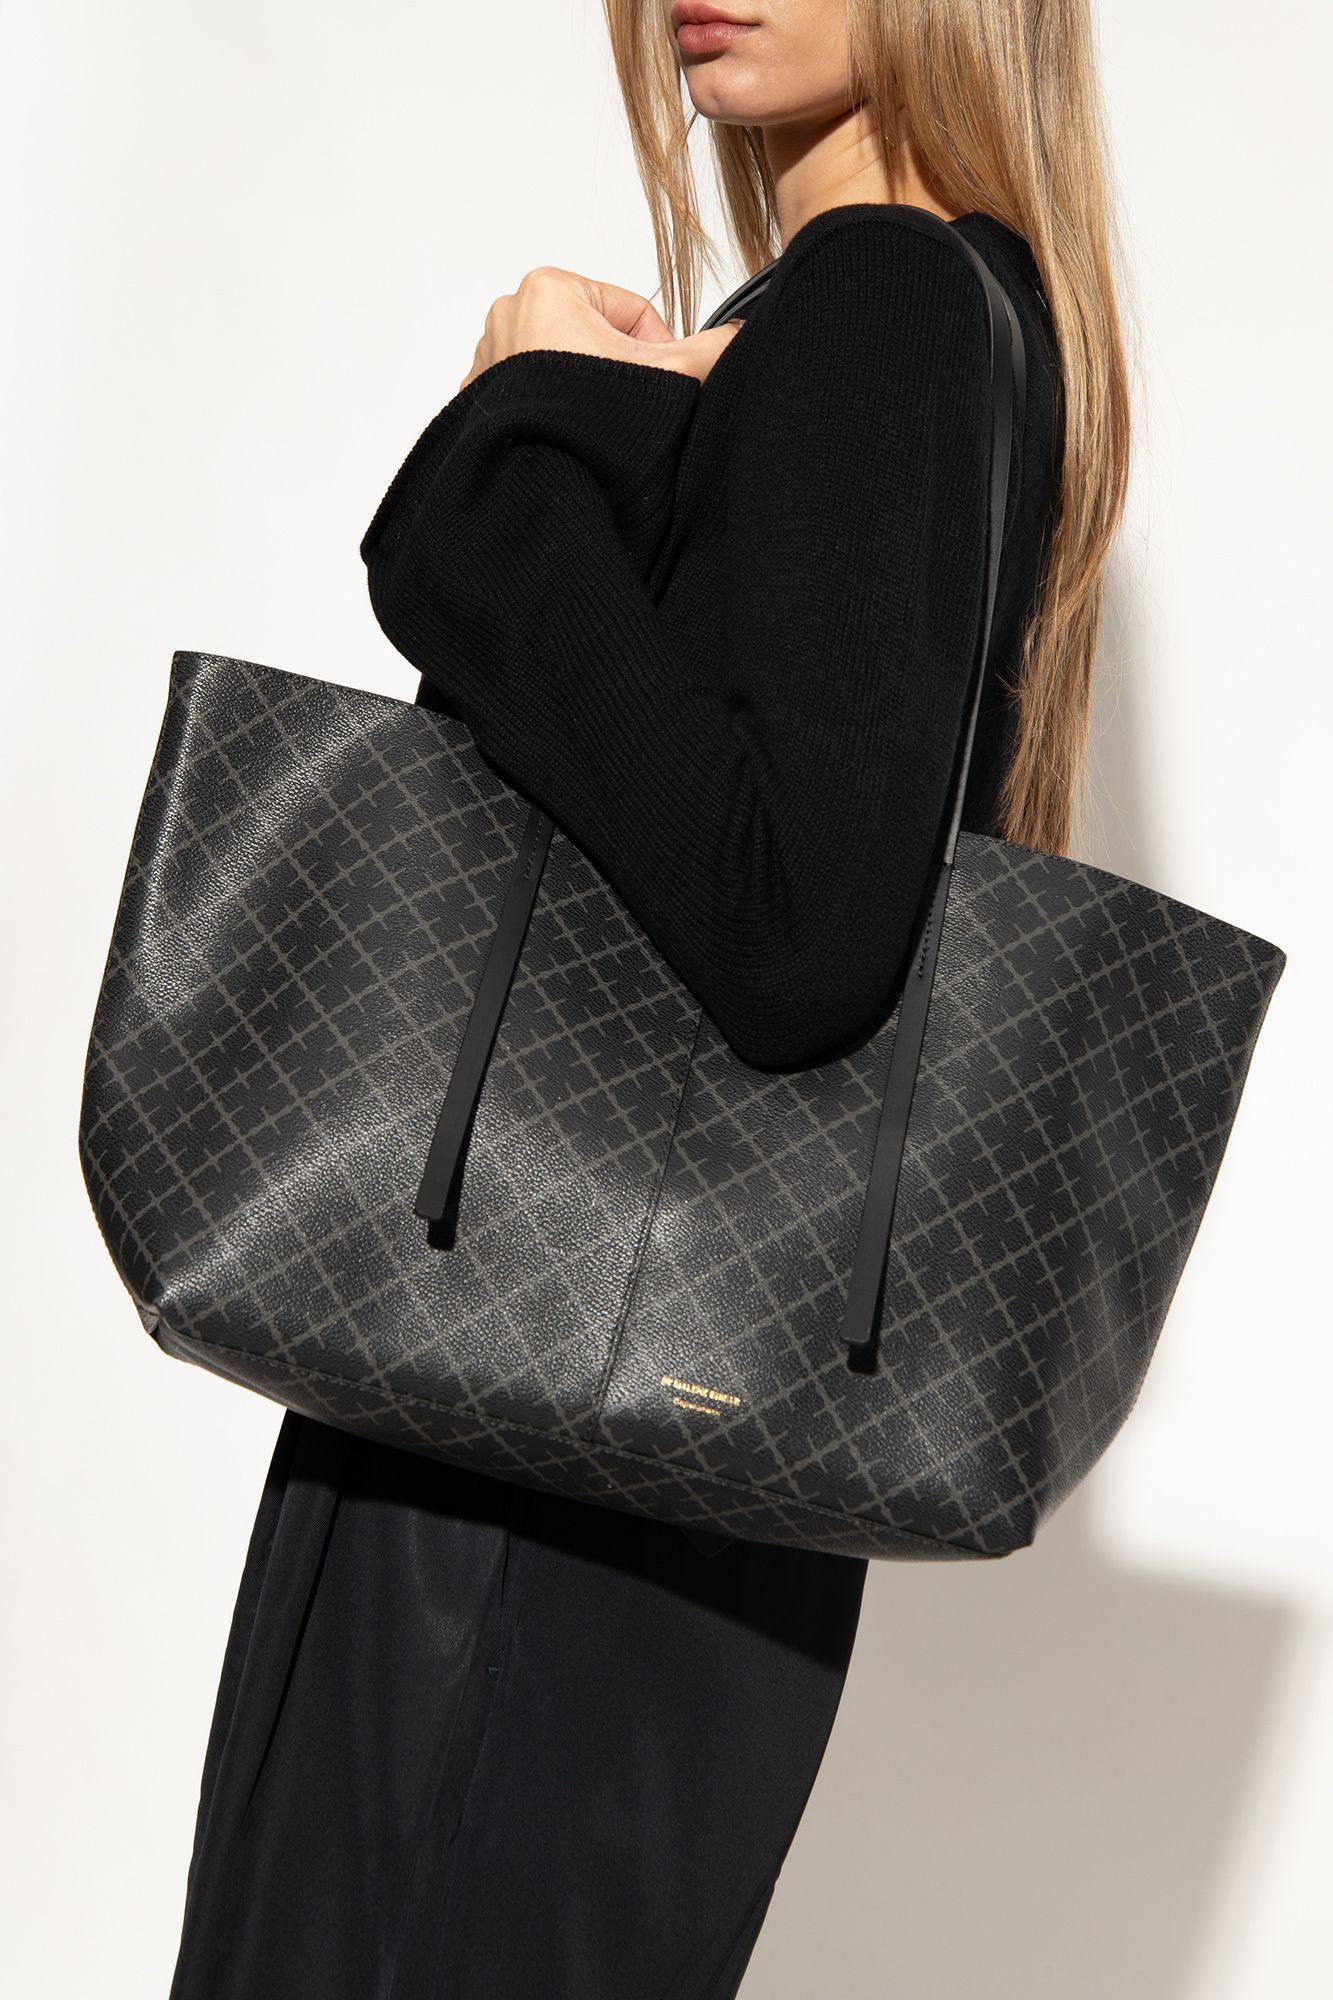 By Malene Birger Abigail | rededuct.com